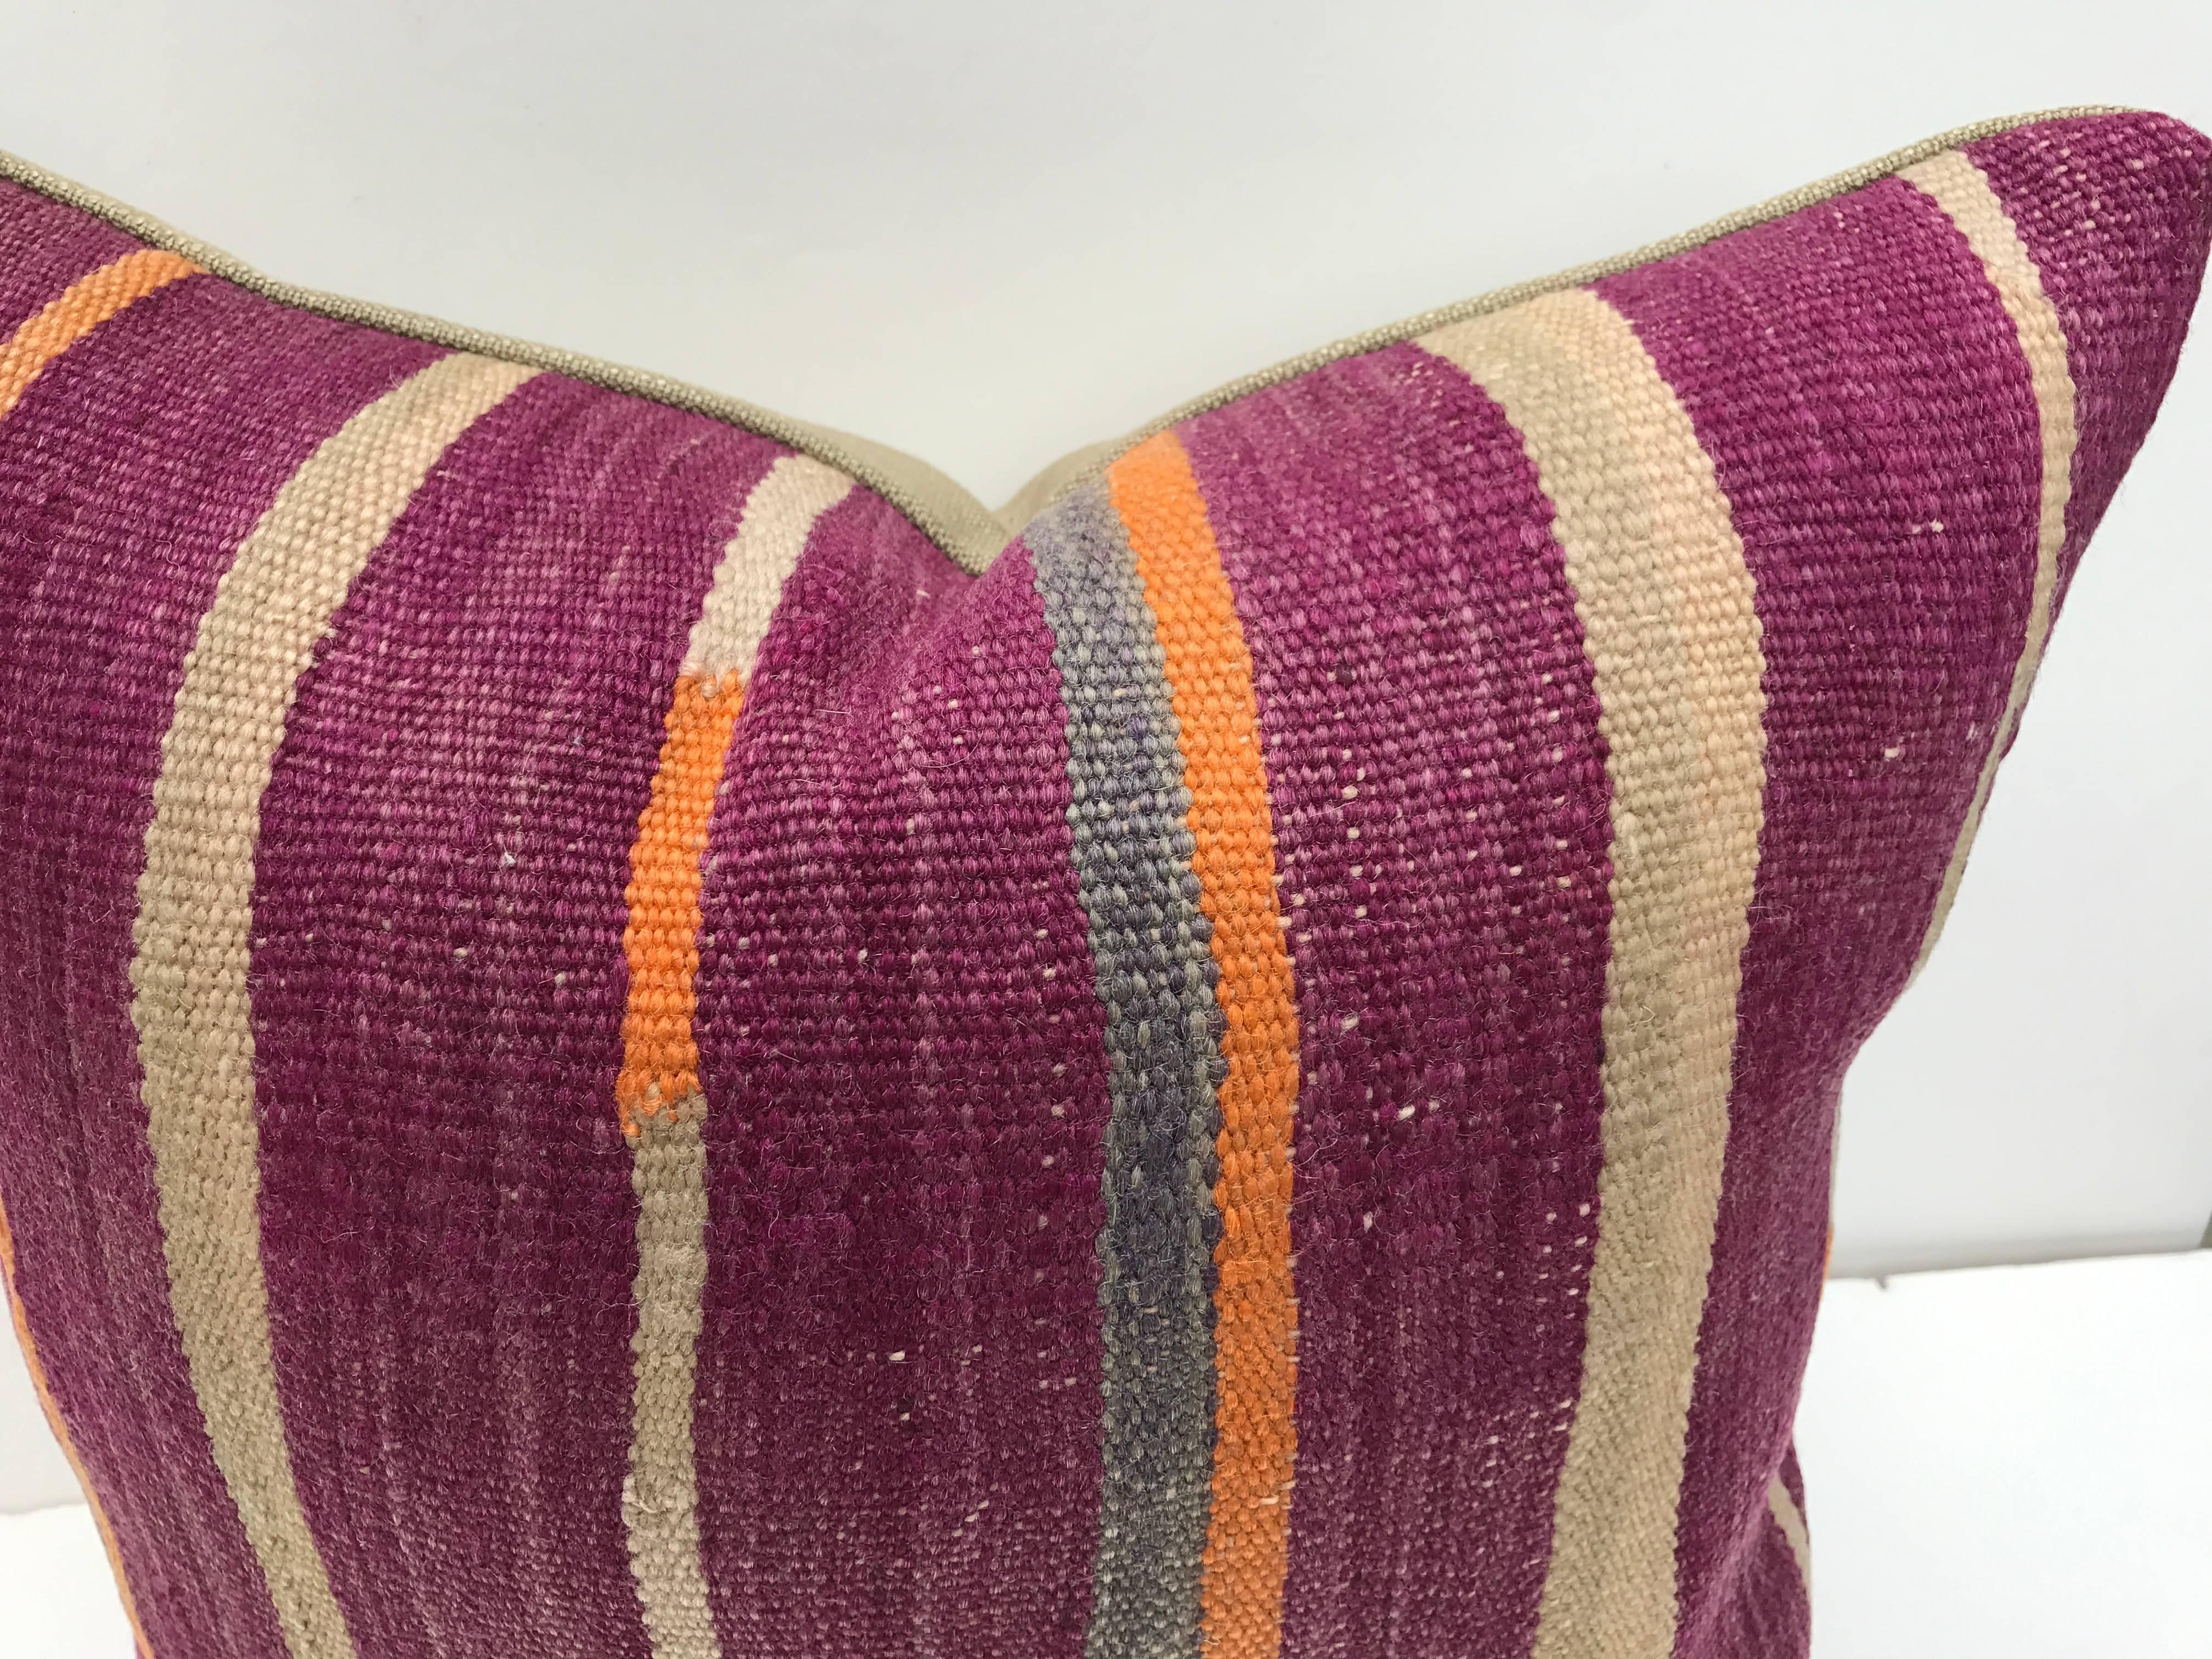 Custom pillows cut from a vintage hand loomed wool Moroccan Berber rug from the Atlas Mountains. Flat-weave stripes have good color and wool is soft and lustrous. Pillow is backed in linen, filled with an insert of 50/50 down and feathers and